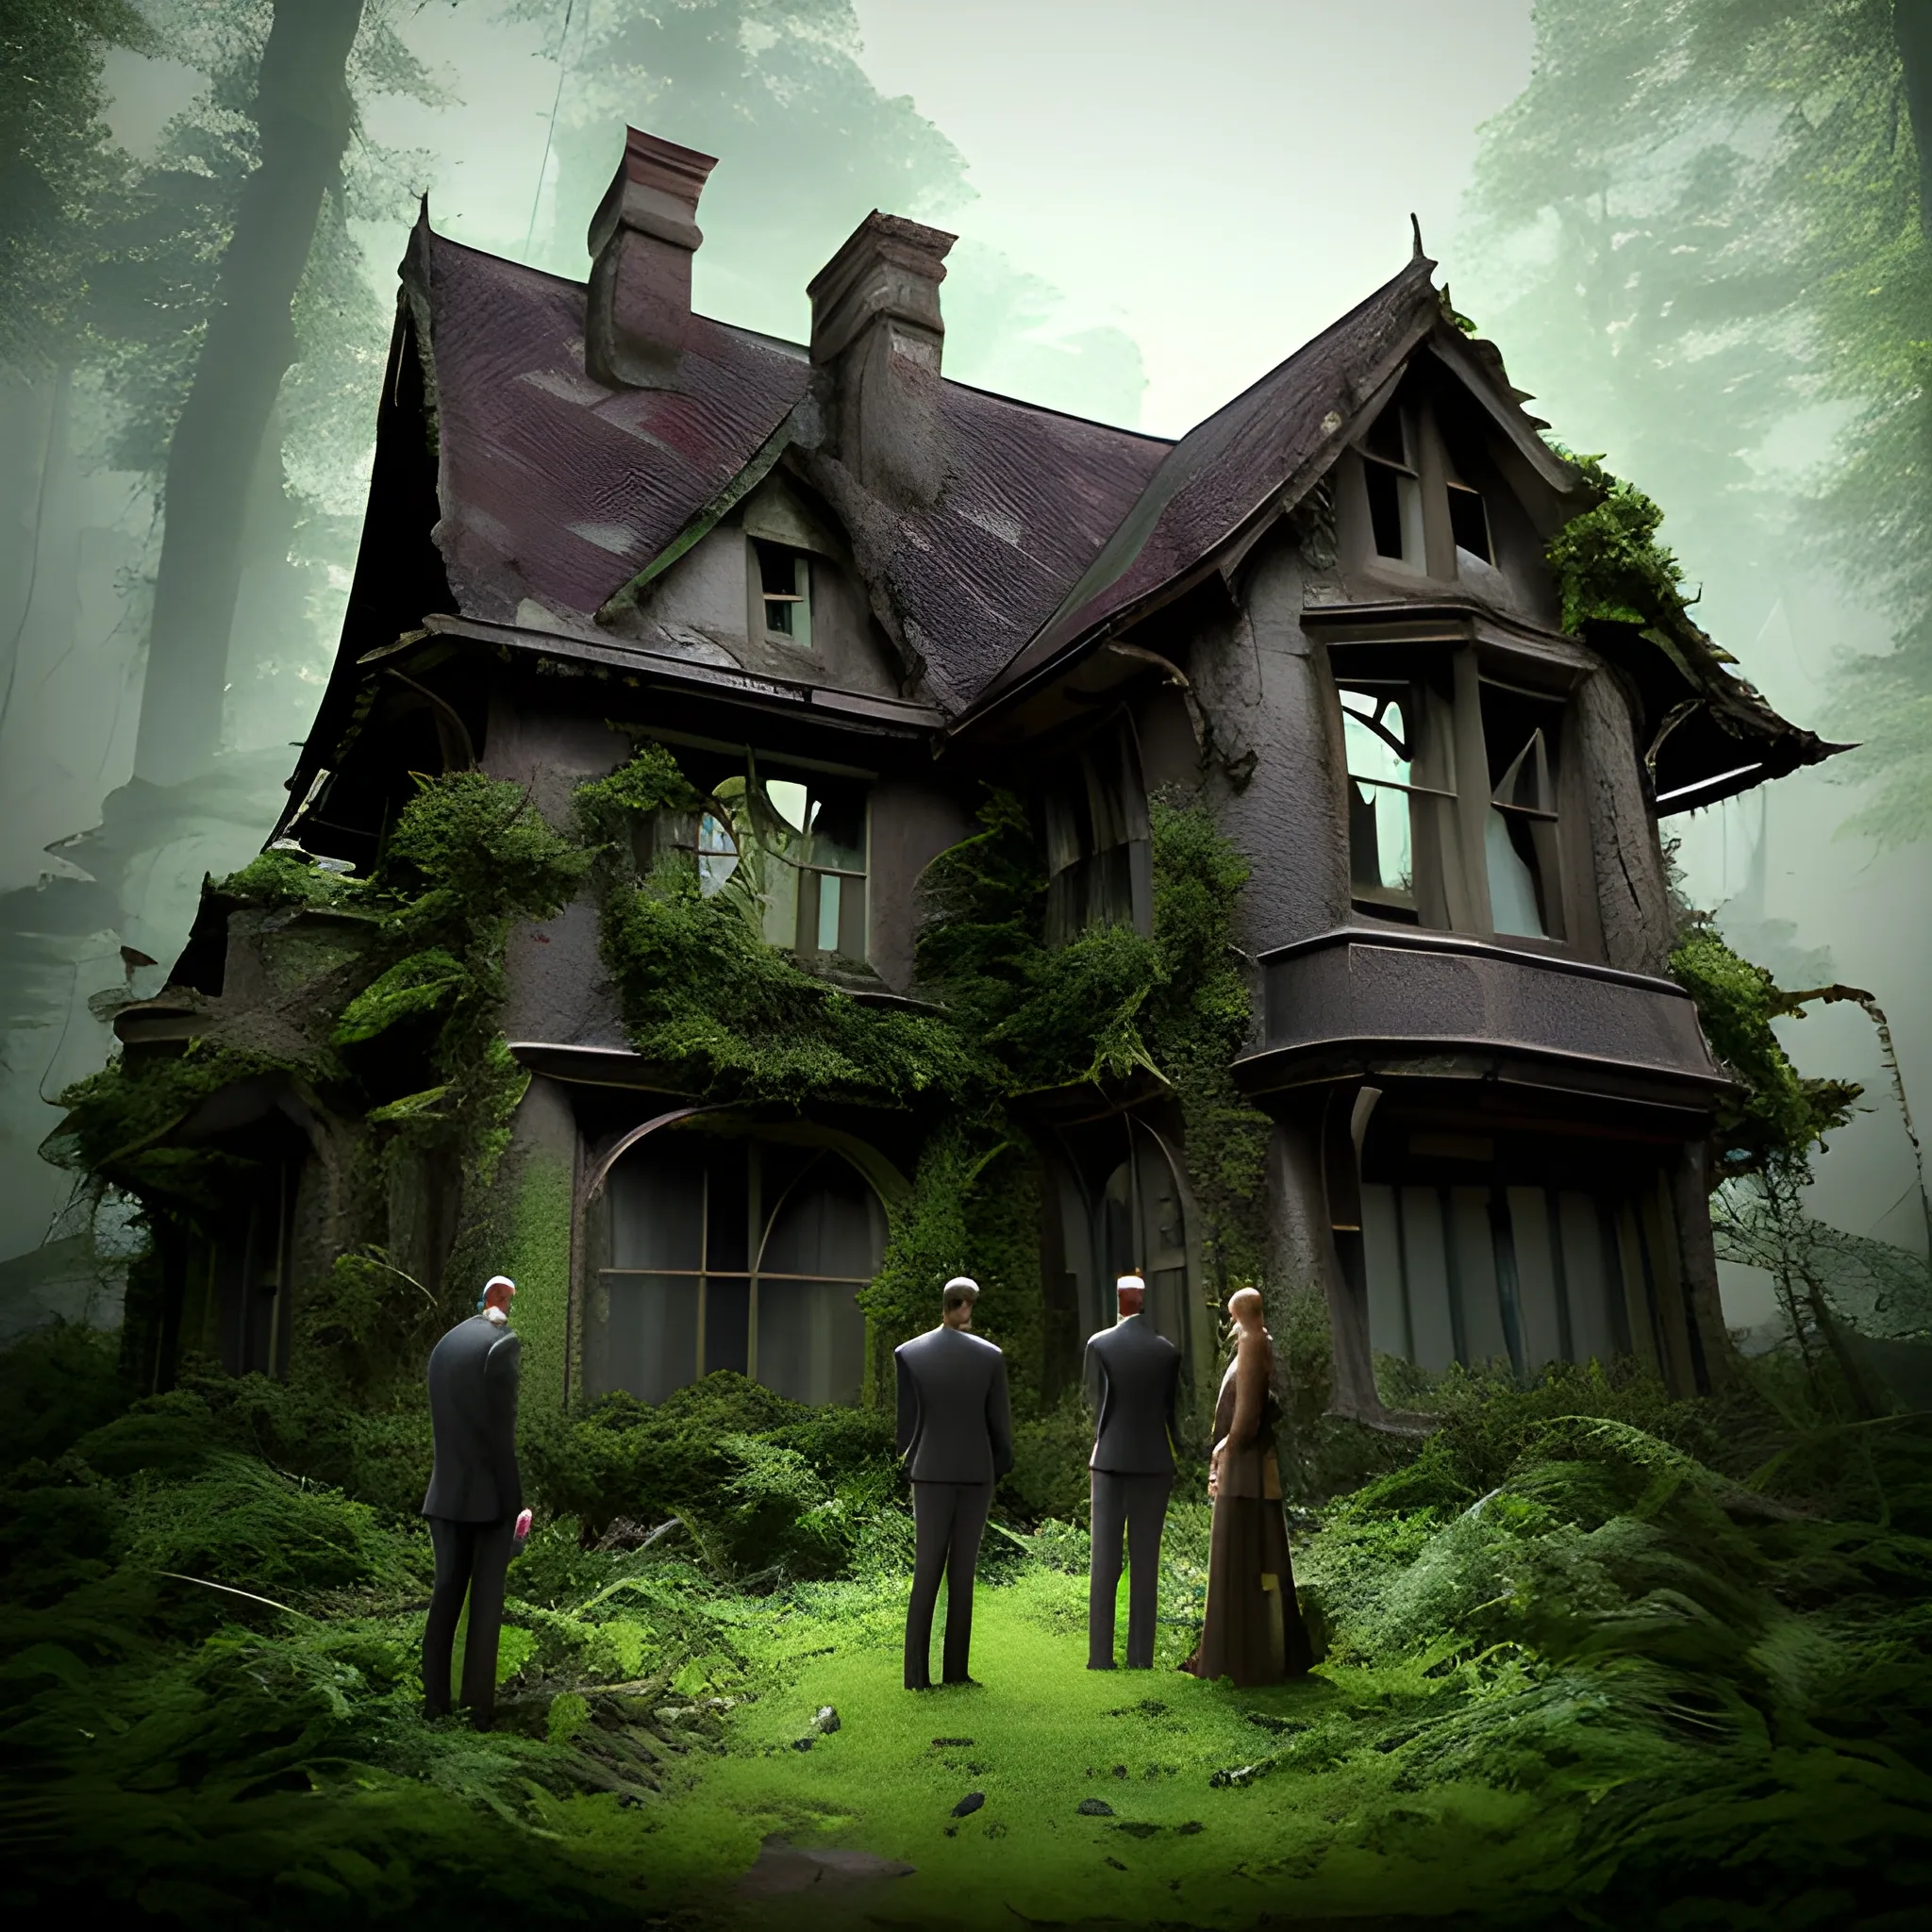 Description: Picture four children (two boys and two girls) standing at the edge of a dense forest. They should look intrigued and maybe a bit cautious as they observe an old, eerie house that seems to have appeared among the trees. The house should look dilapidated, with broken windows and ivy creeping up its walls., , 3D, Realistic, vibrant